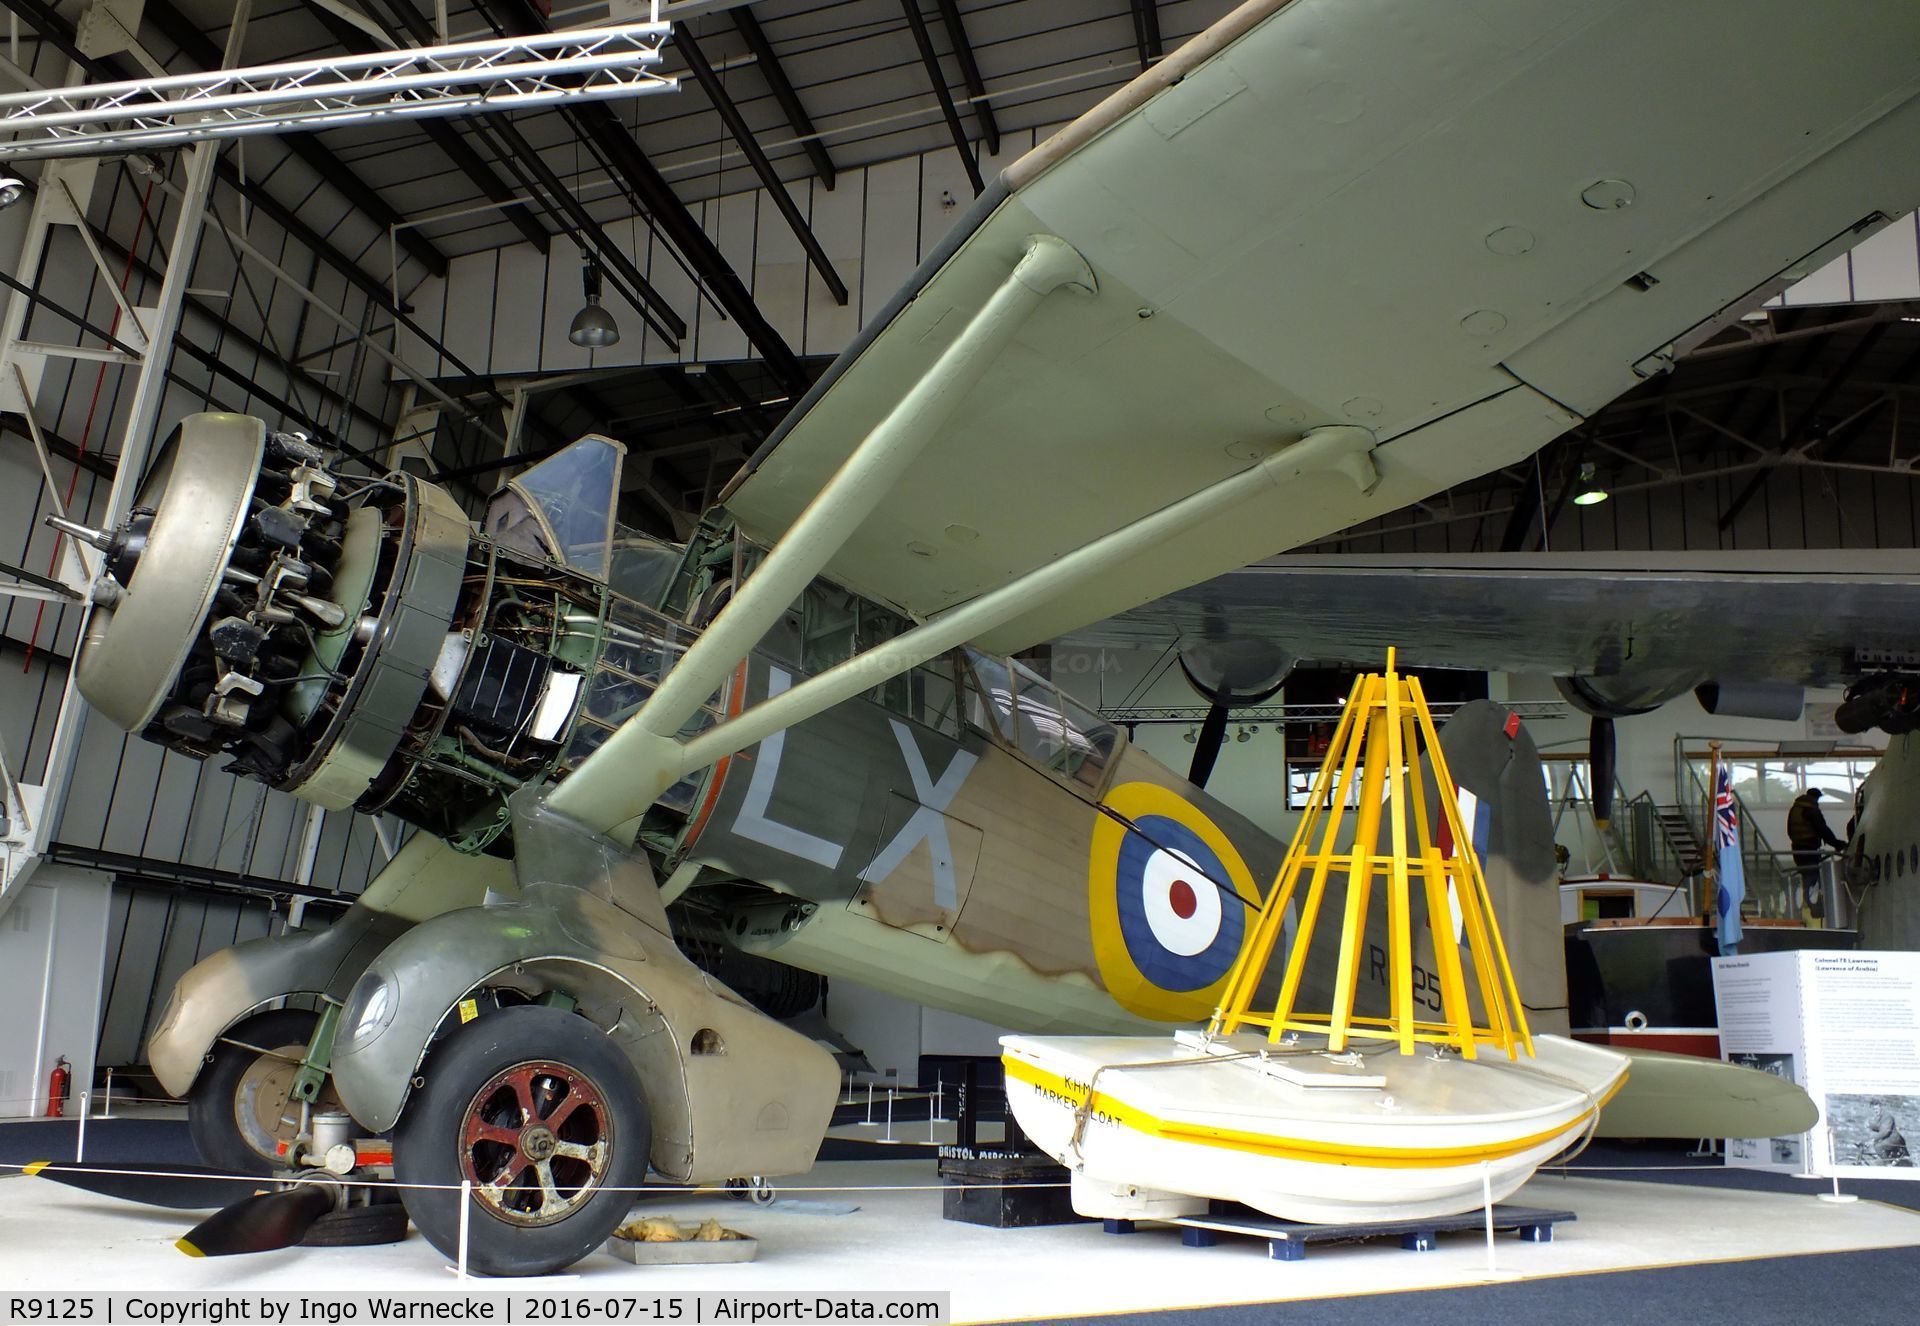 R9125, 1940 Westland Lysander III C/N 1185, Westland Lysander III (getting dismantled for removal from the Battle of Britain Hall) at the RAF-Museum, Hendon